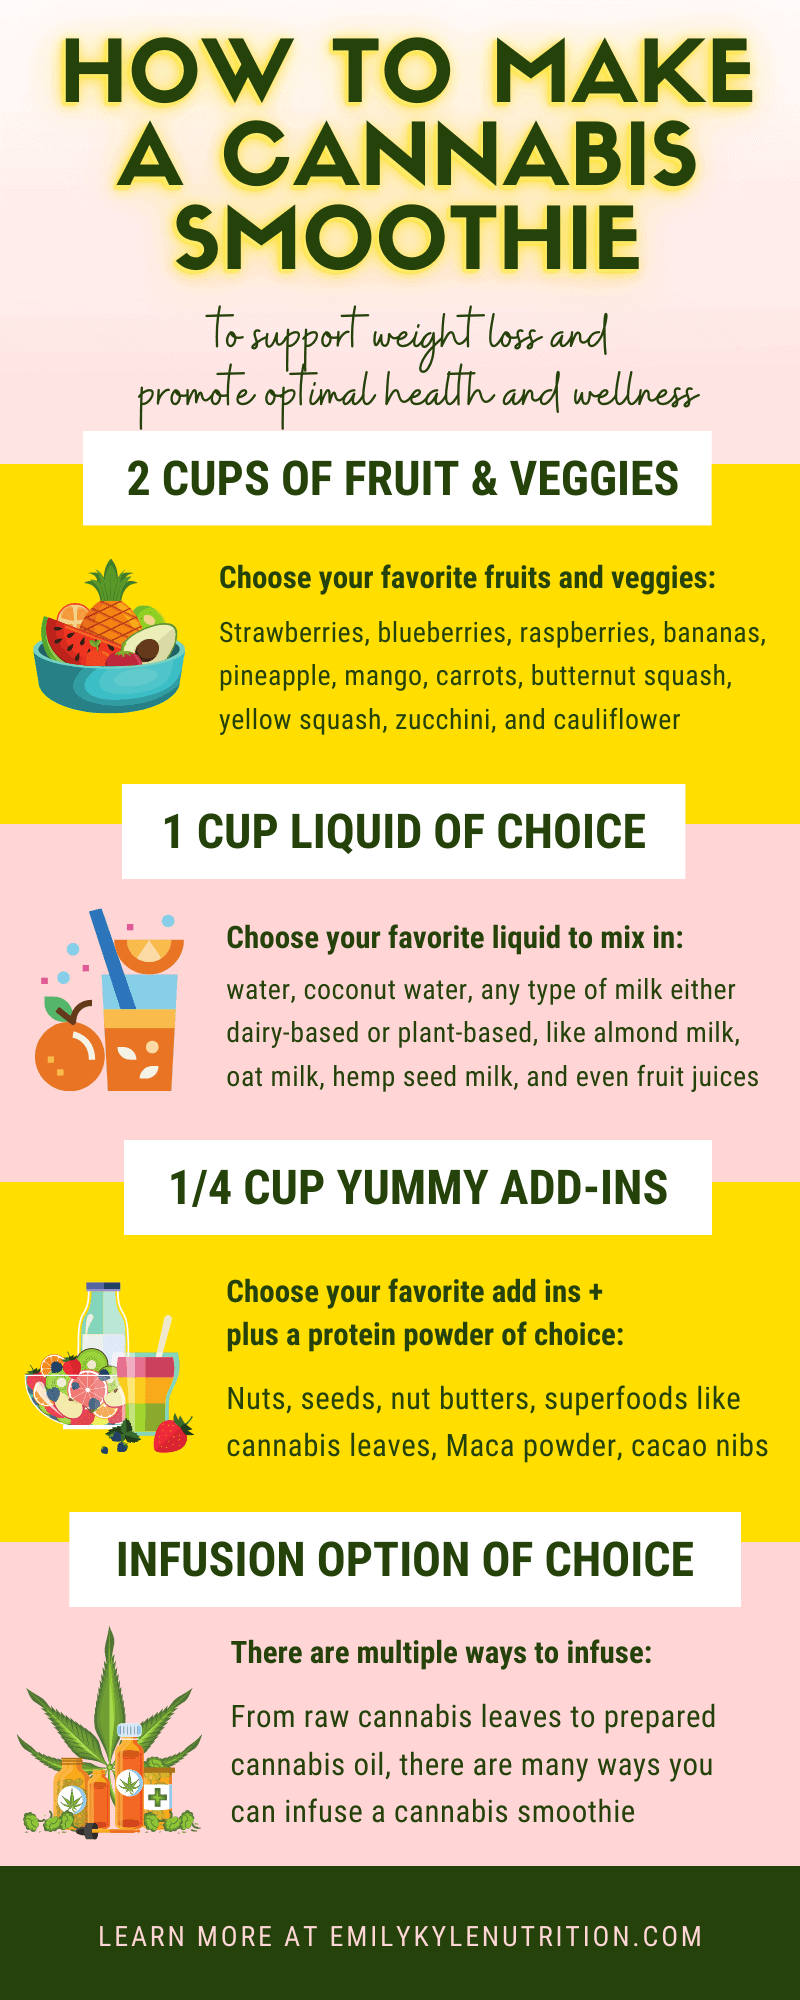 Info graphic with details on how to make a cannabis smoothie. 